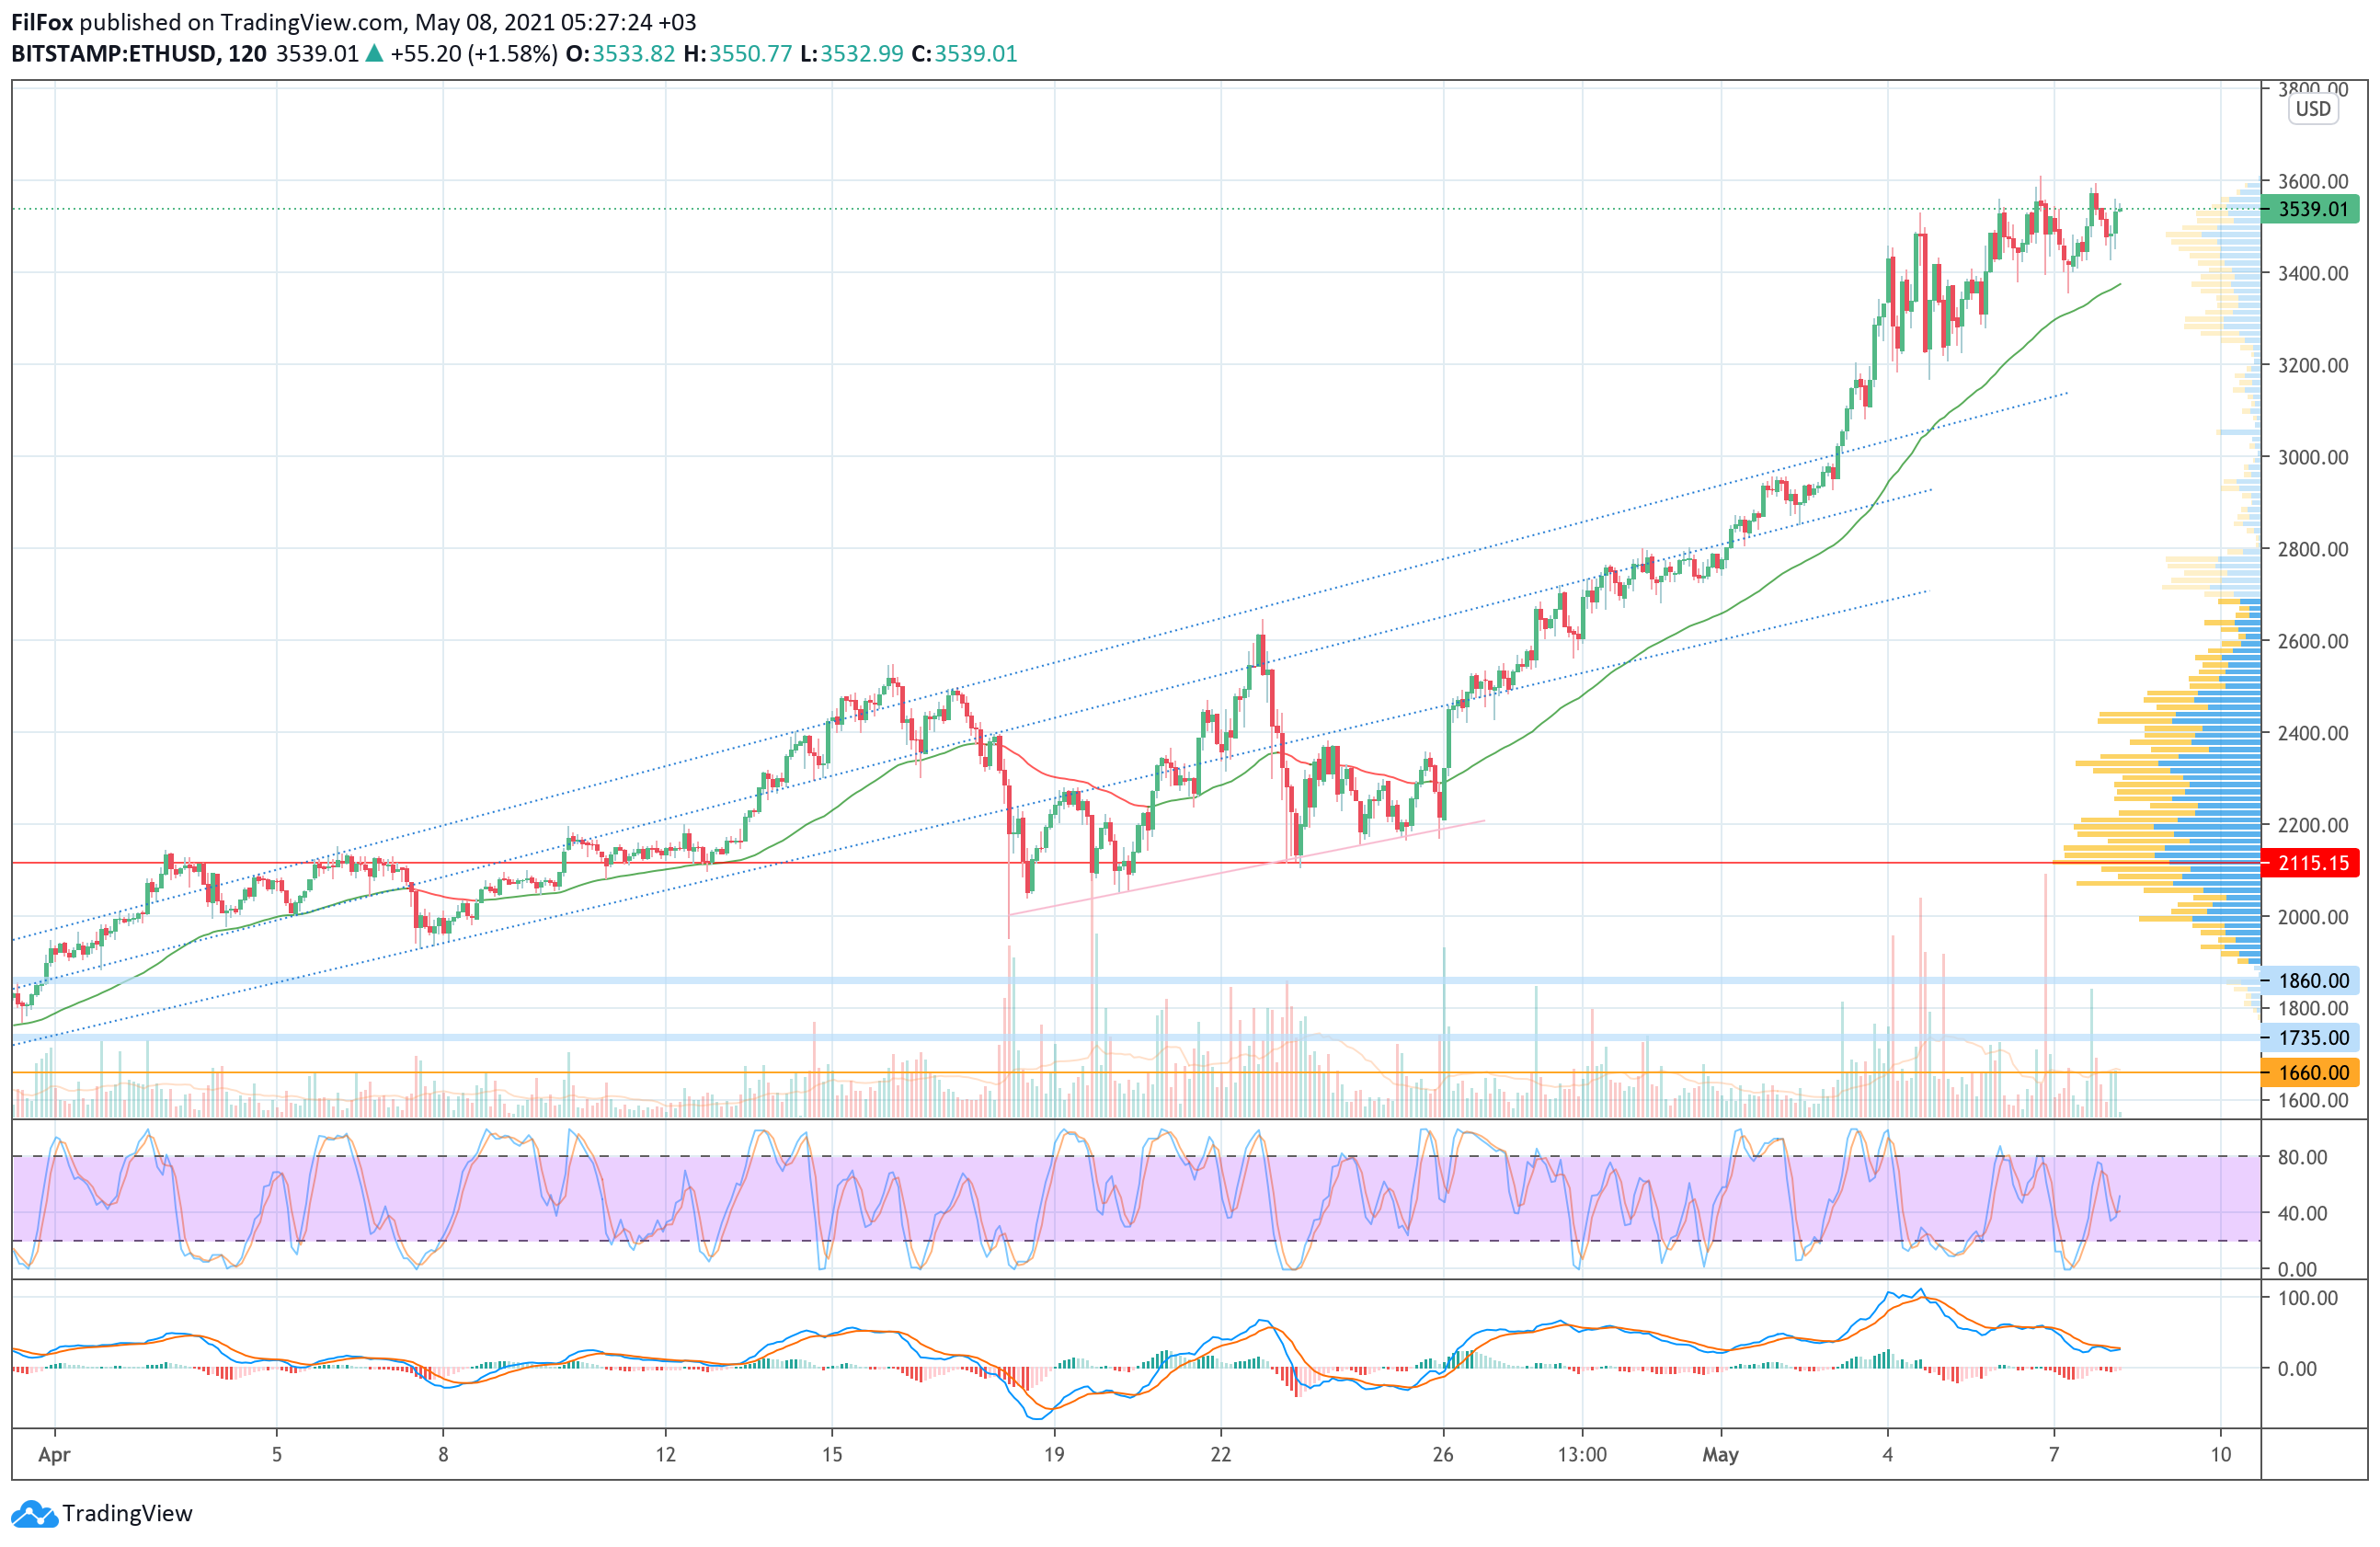 Analysis of the prices of Bitcoin, Ethereum, XRP for 05/08/2021